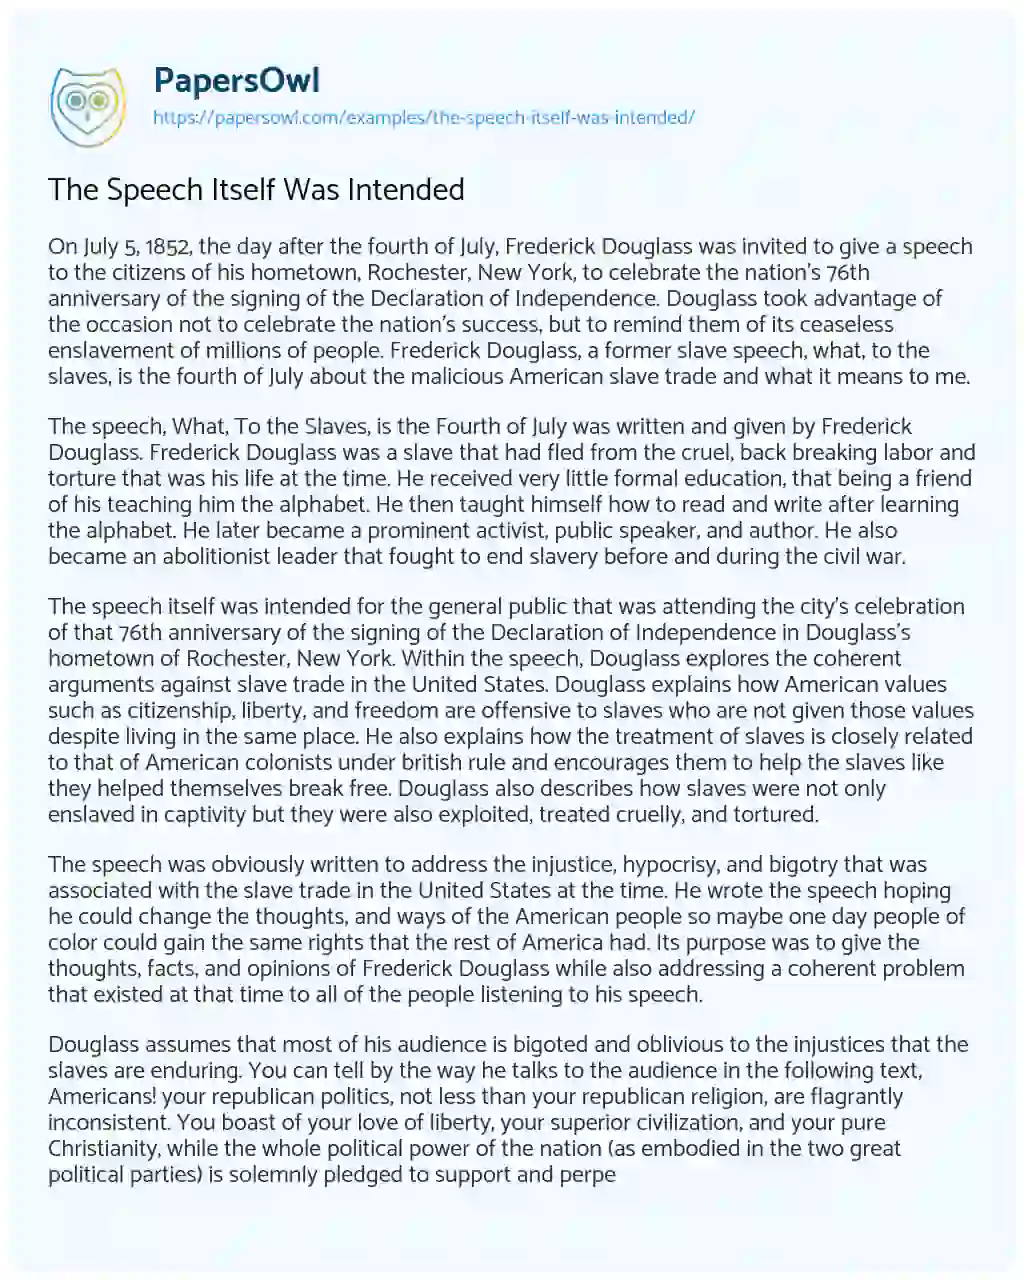 Essay on The Speech itself was Intended